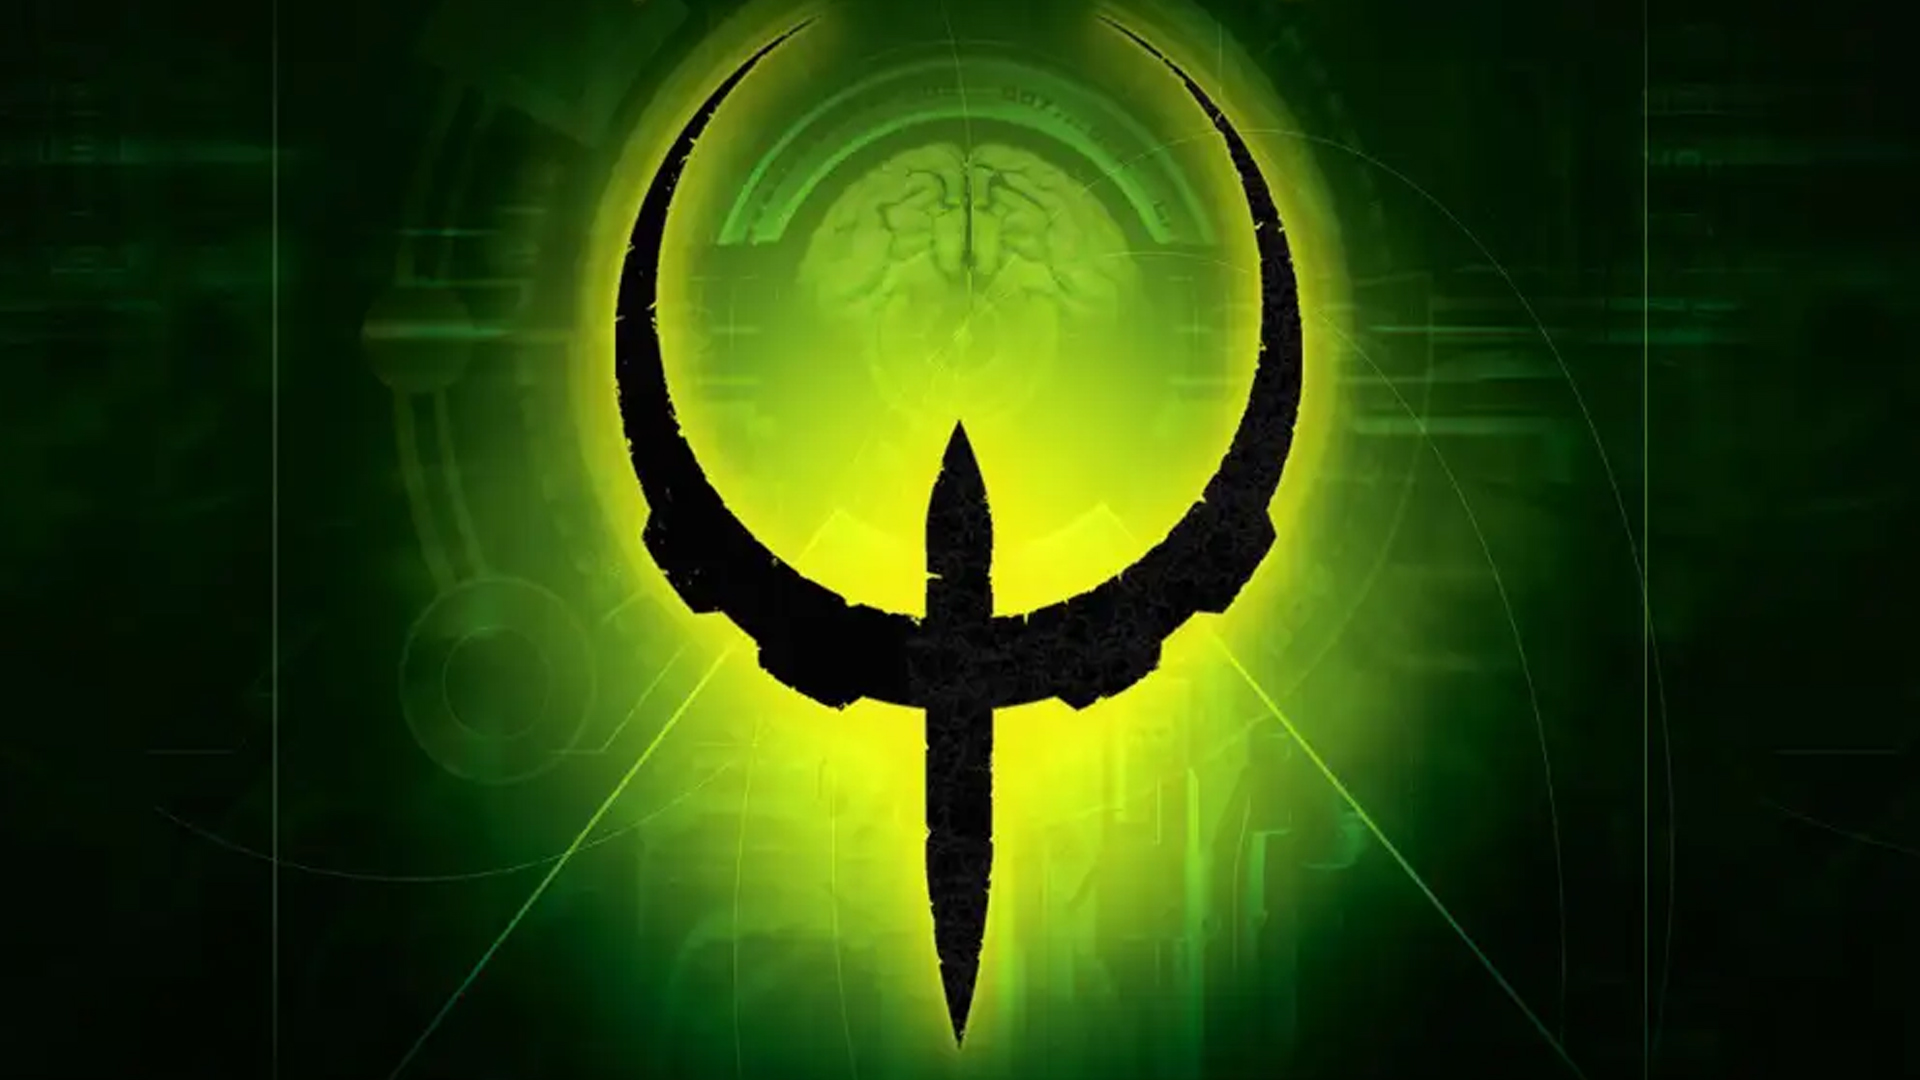 Xbox wants you to test Quake 4 on PC – wait, what?